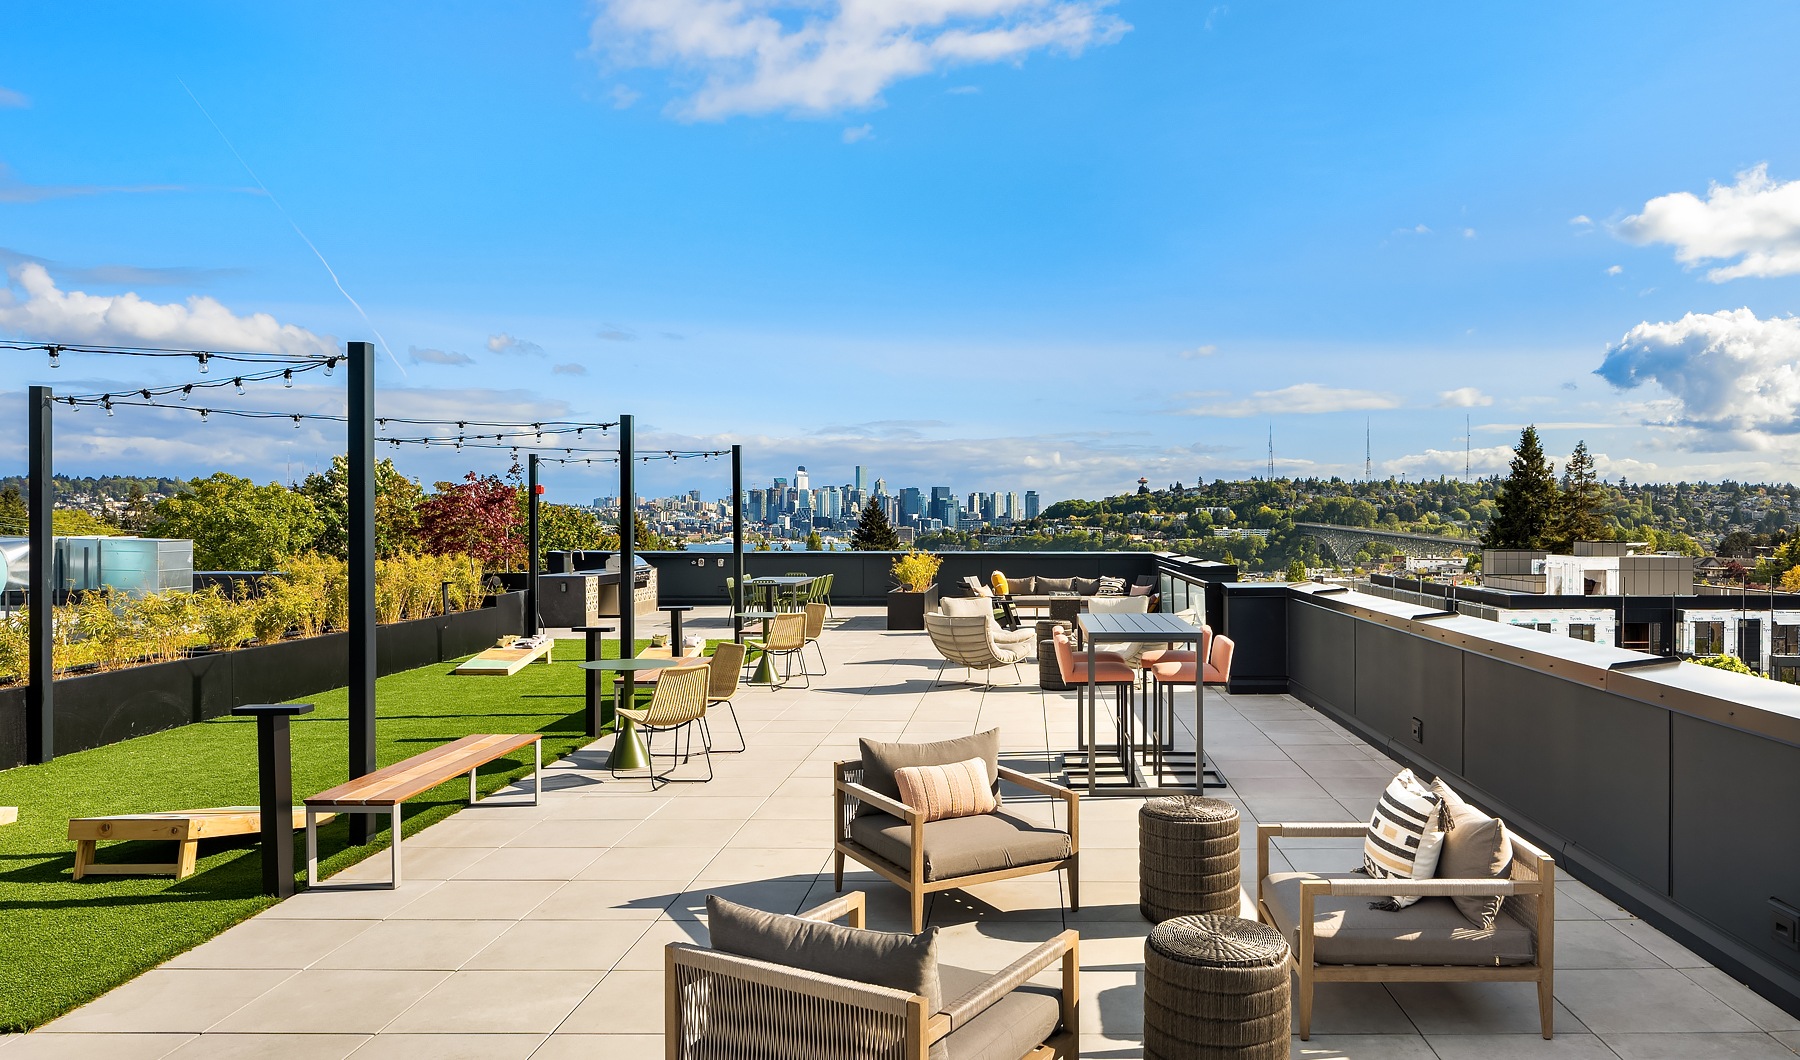 Rooftop lounge with green space and seating